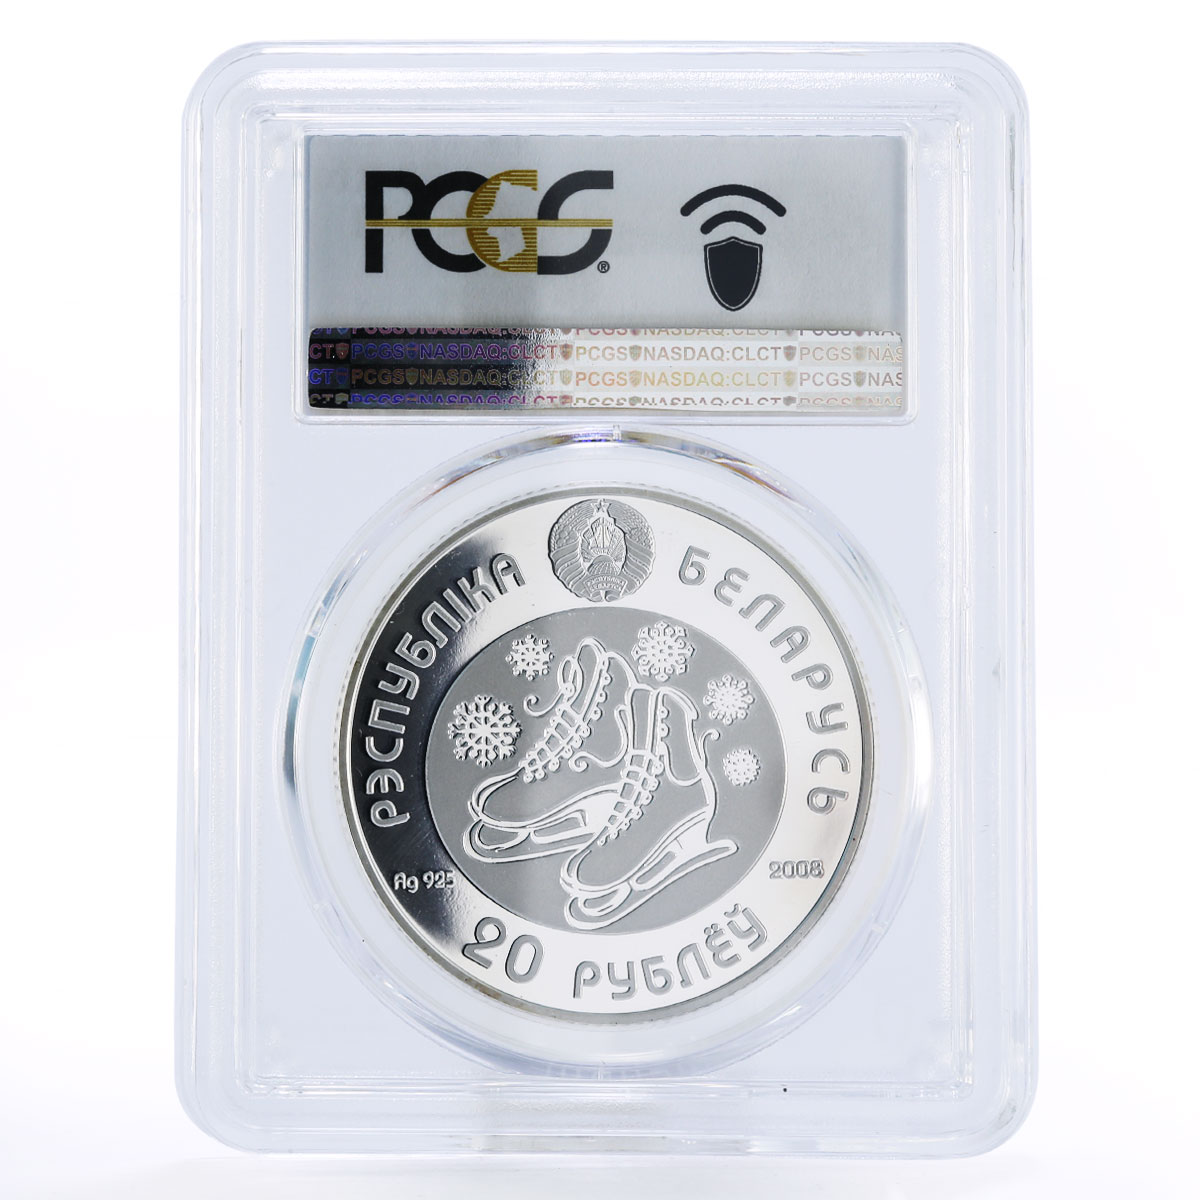 Belarus 20 rubles Olympic Games series Figure Skating PR69 PCGS silver coin 2008